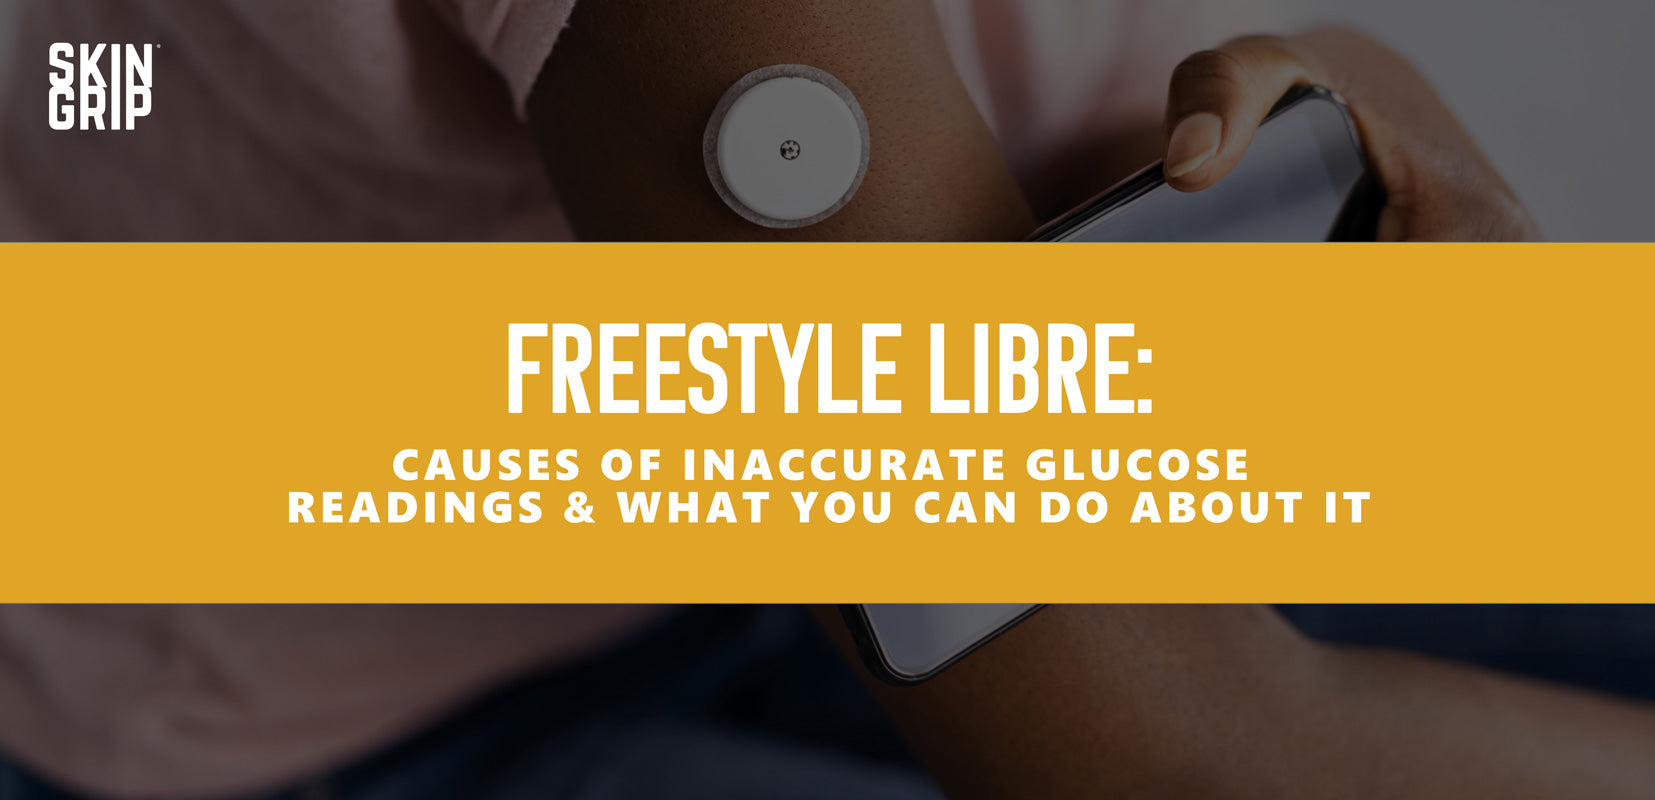 Freestyle Libre: Causes of Inaccurate Glucose Readings & What You Can Do About it